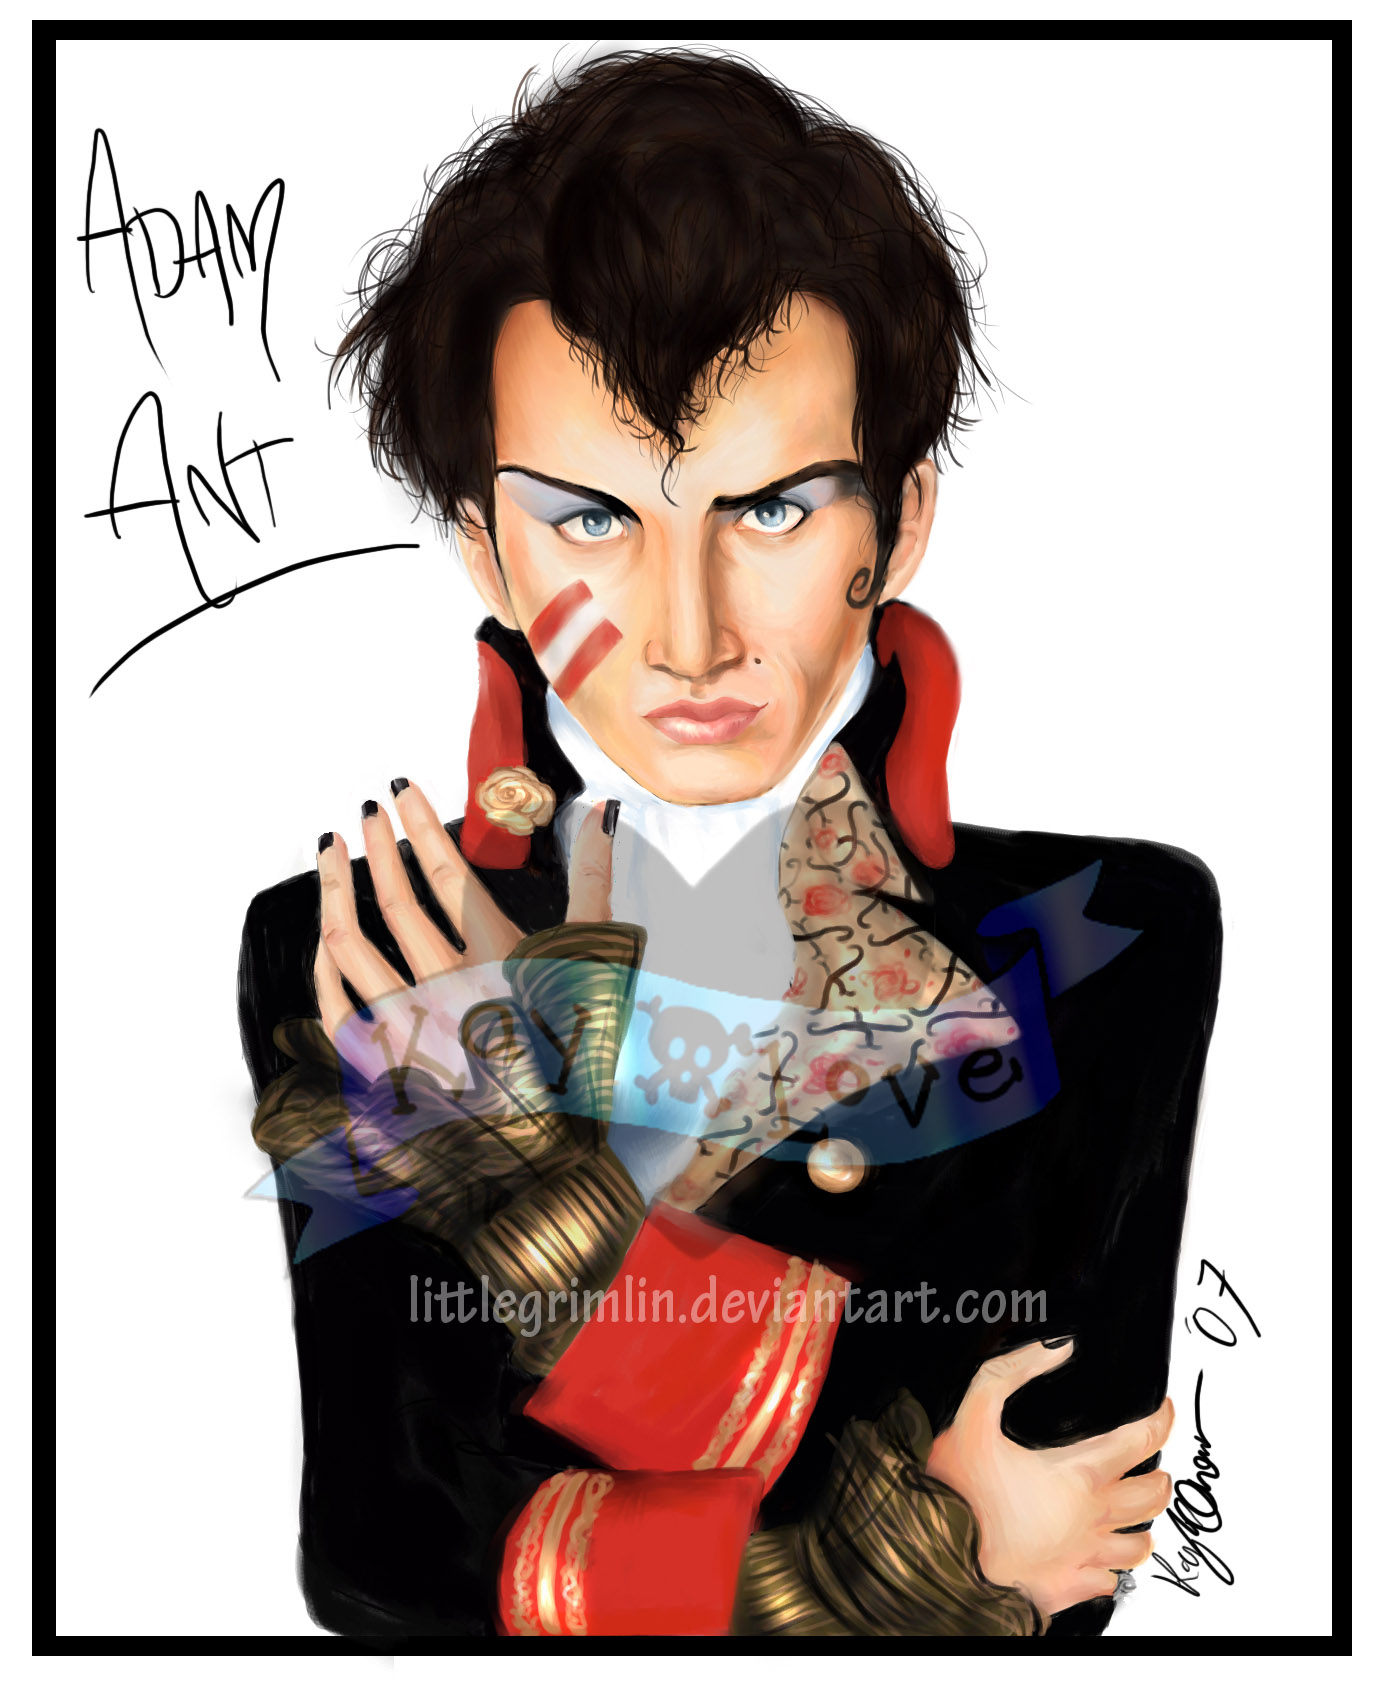 Adam Ant by Kaylove